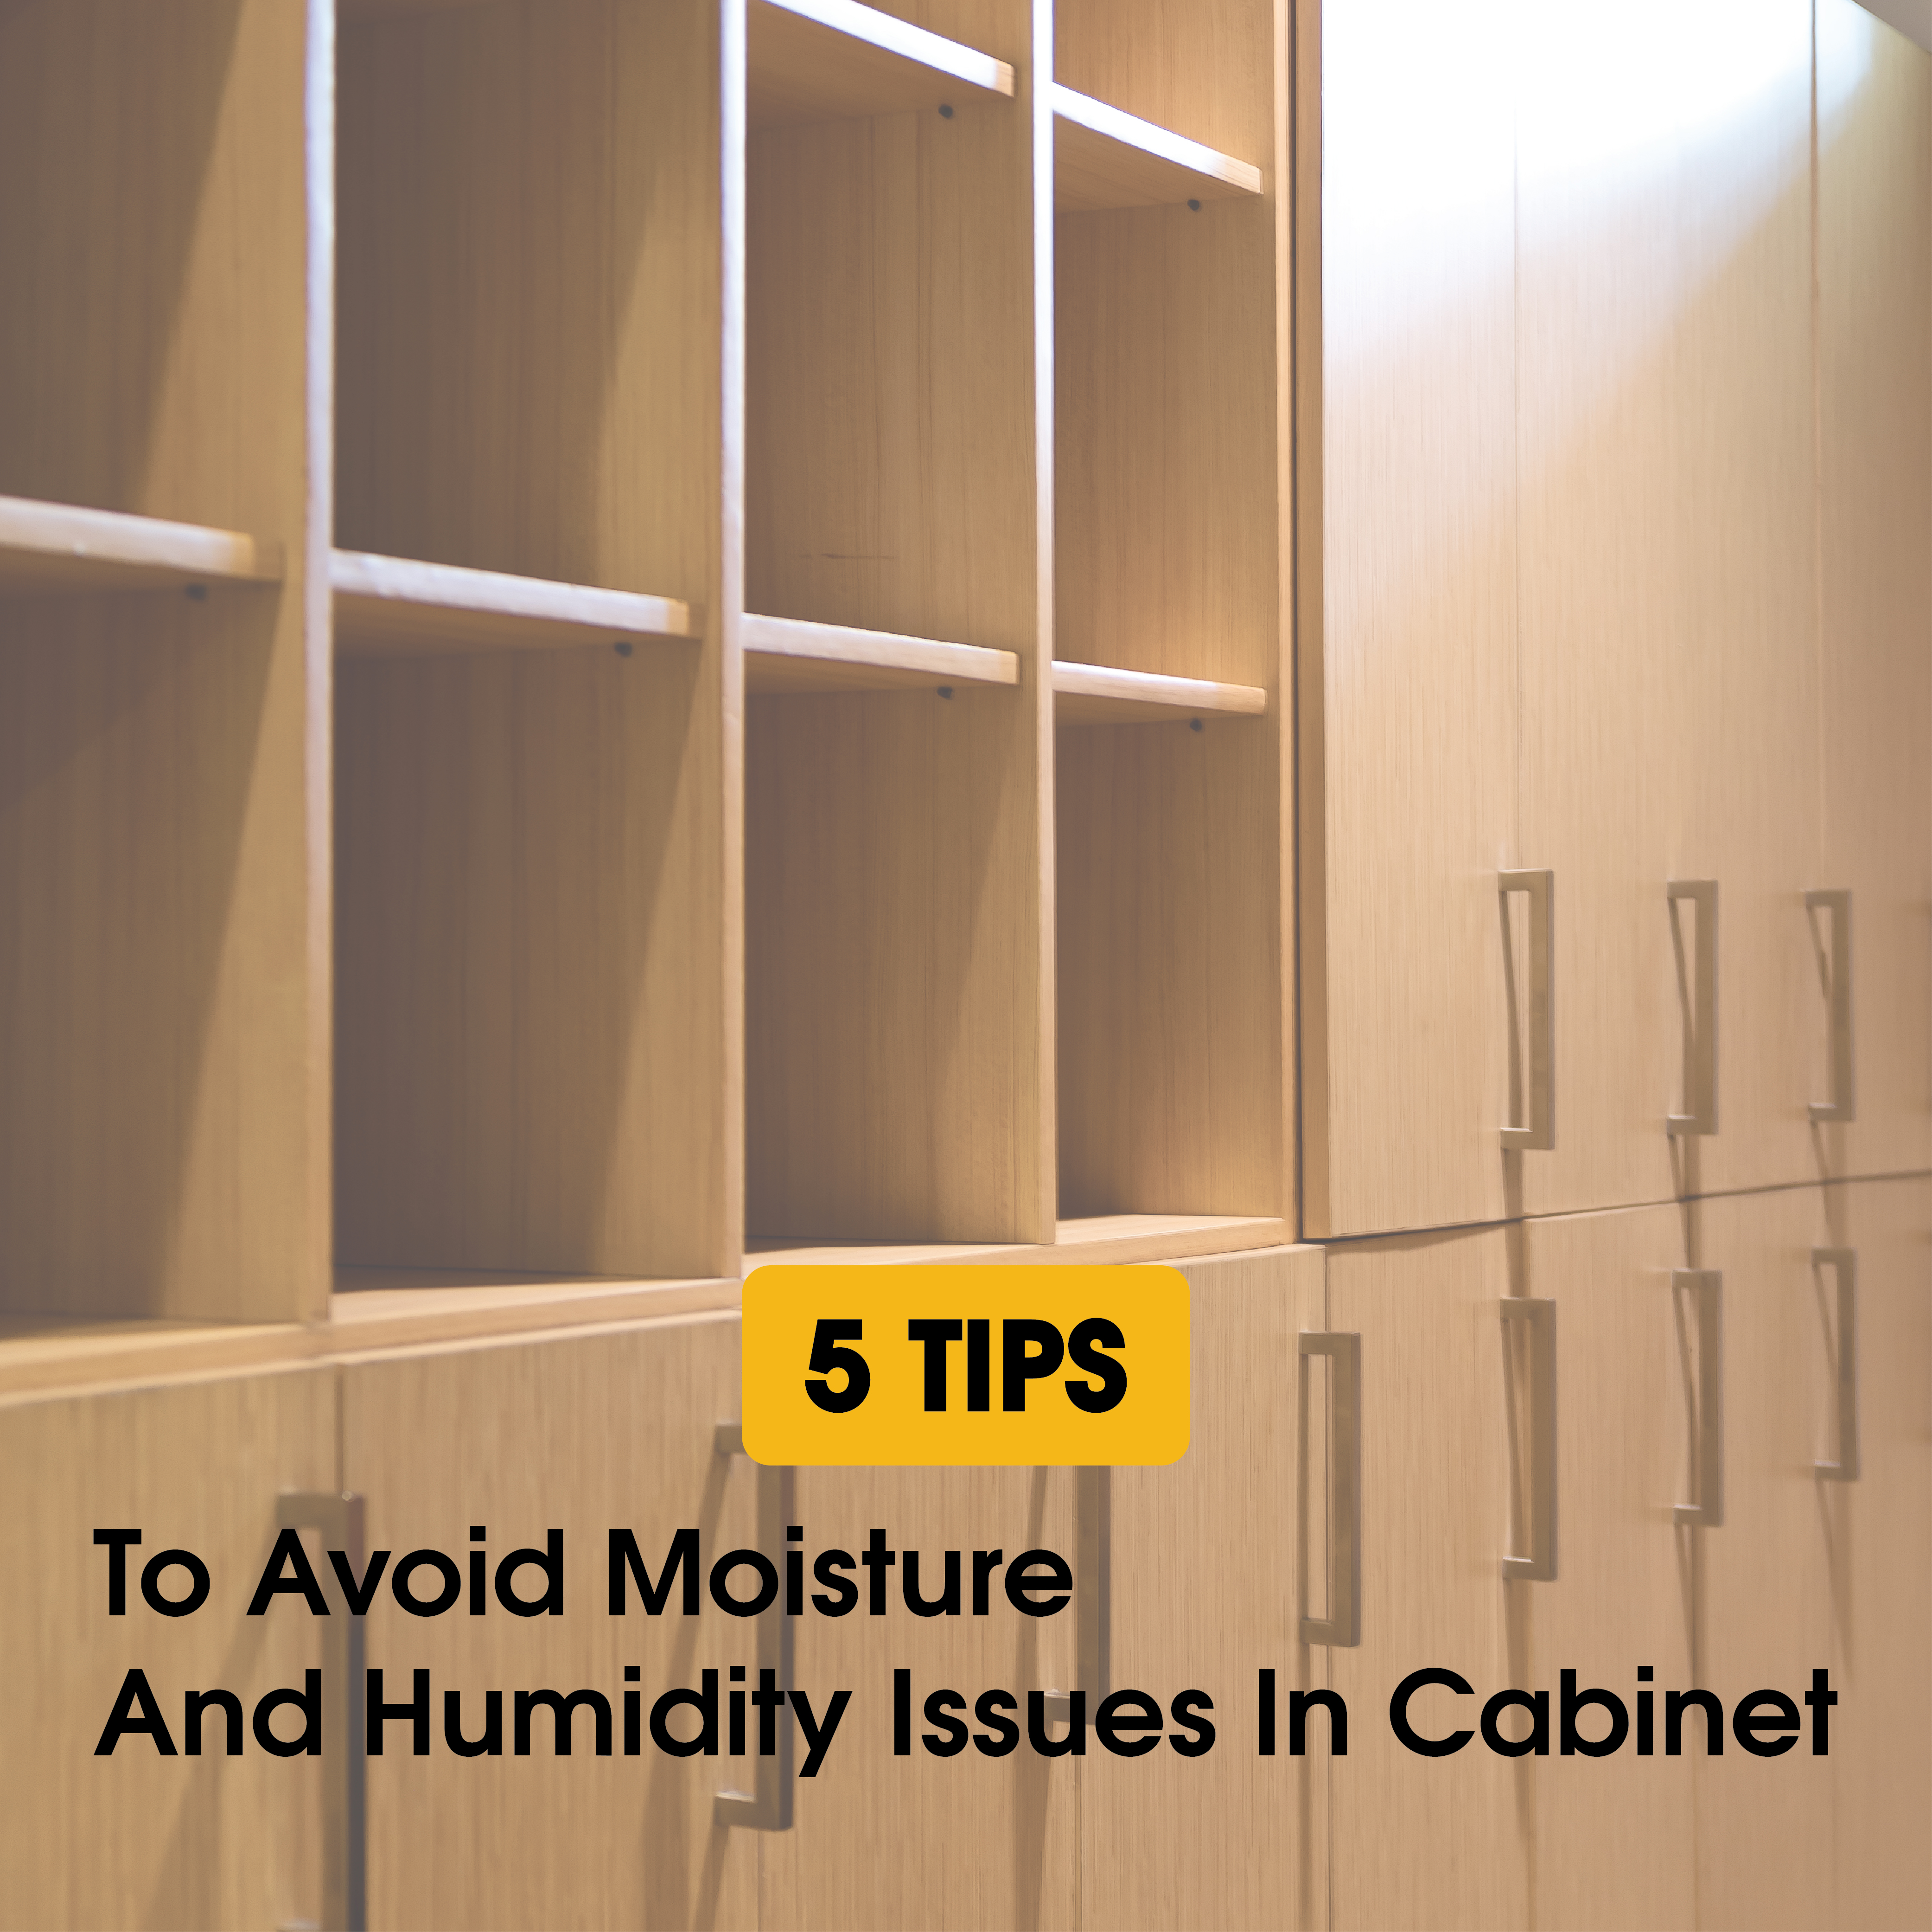 5 Tips To Avoid Moisture And Humidity Issues In Cabinet